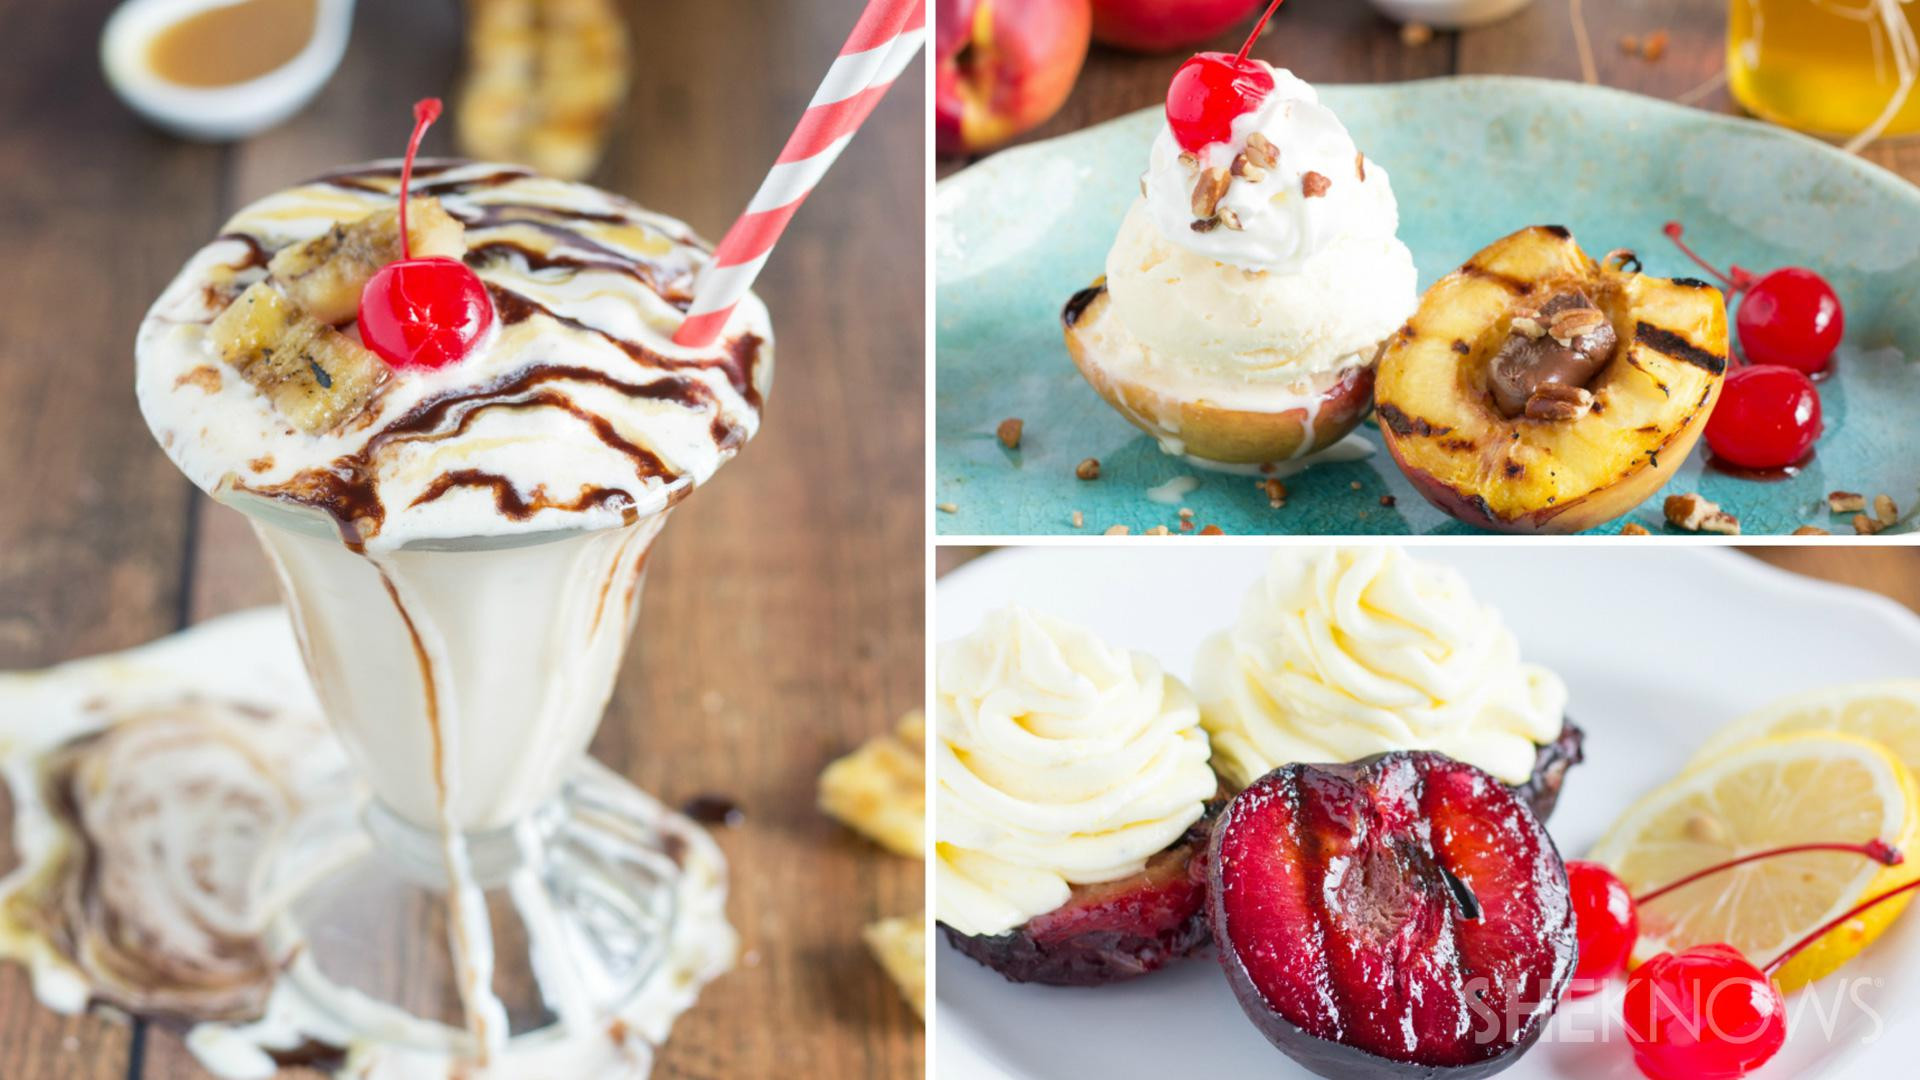 Refreshing Summer Desserts
 3 Summer desserts you can make on the grill